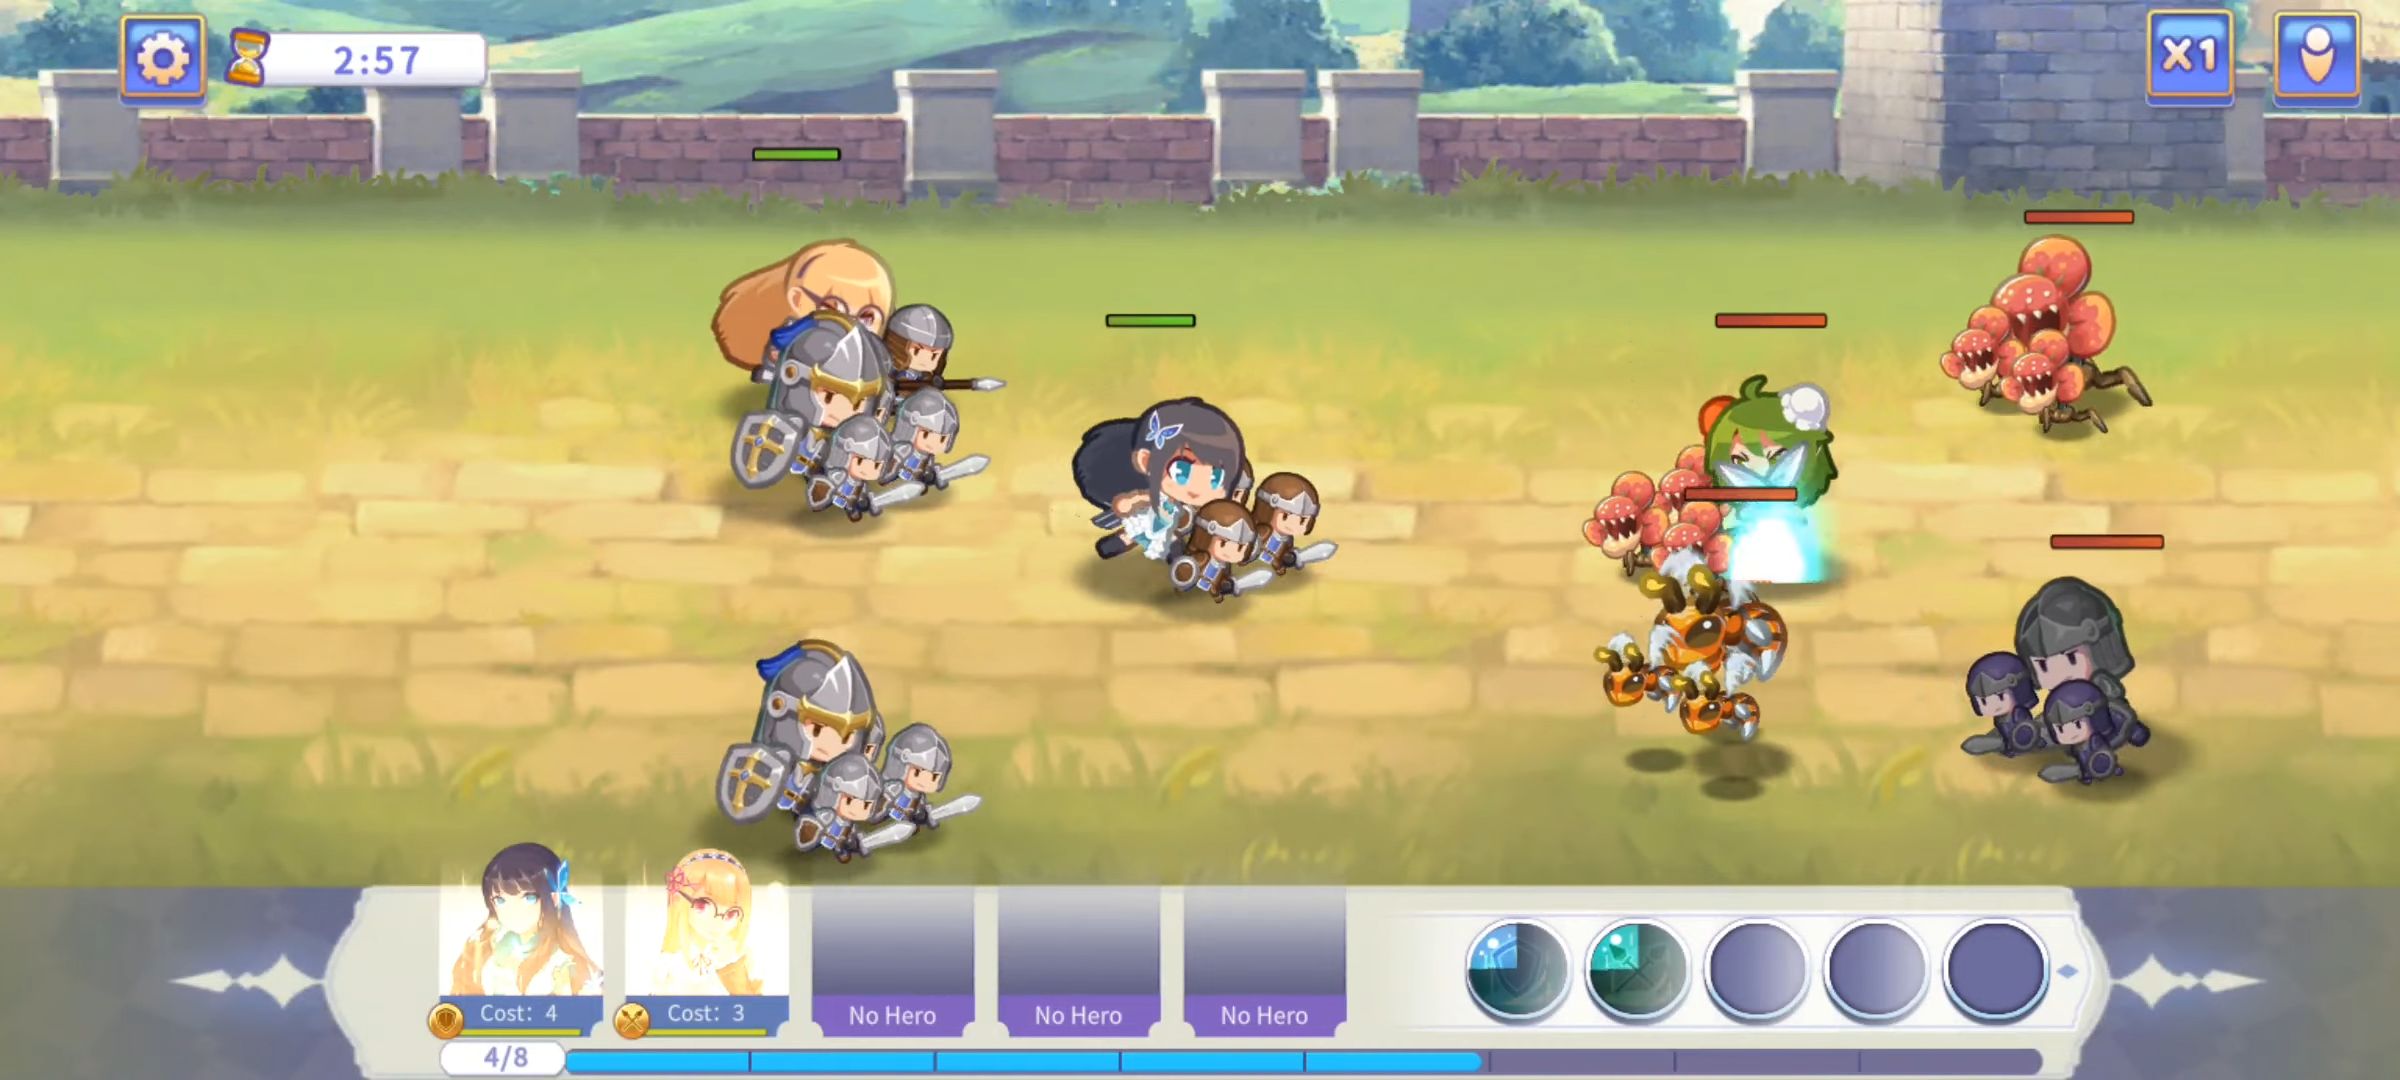 Gameplay of the Royal Knight Tales for Android phone or tablet.